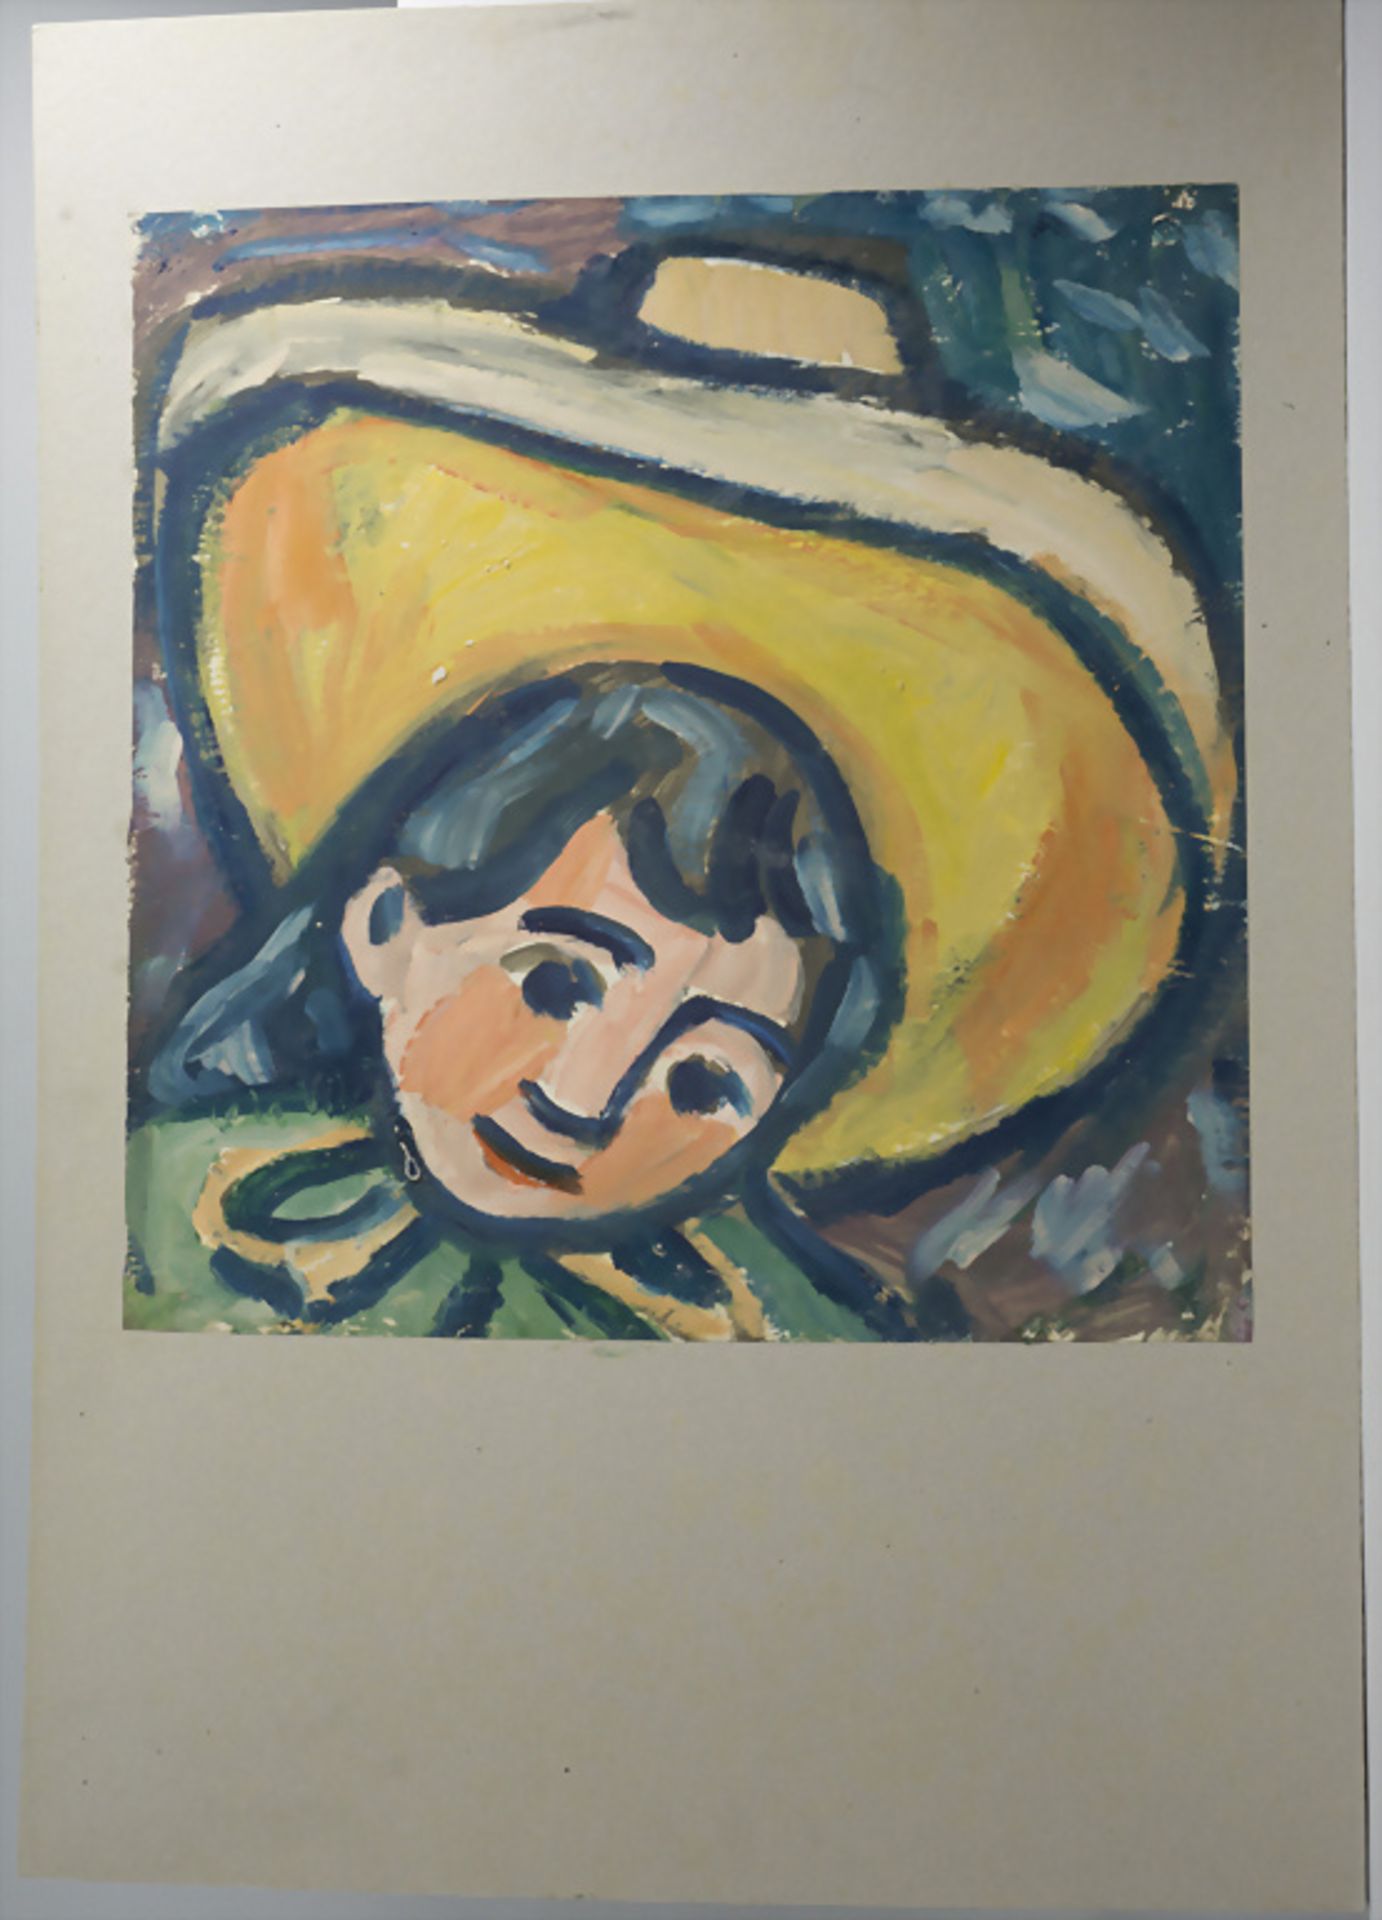 Miklos Németh (1934-2012), 'Mädchen mit Hut' / 'A girl with a hat' - Image 2 of 2